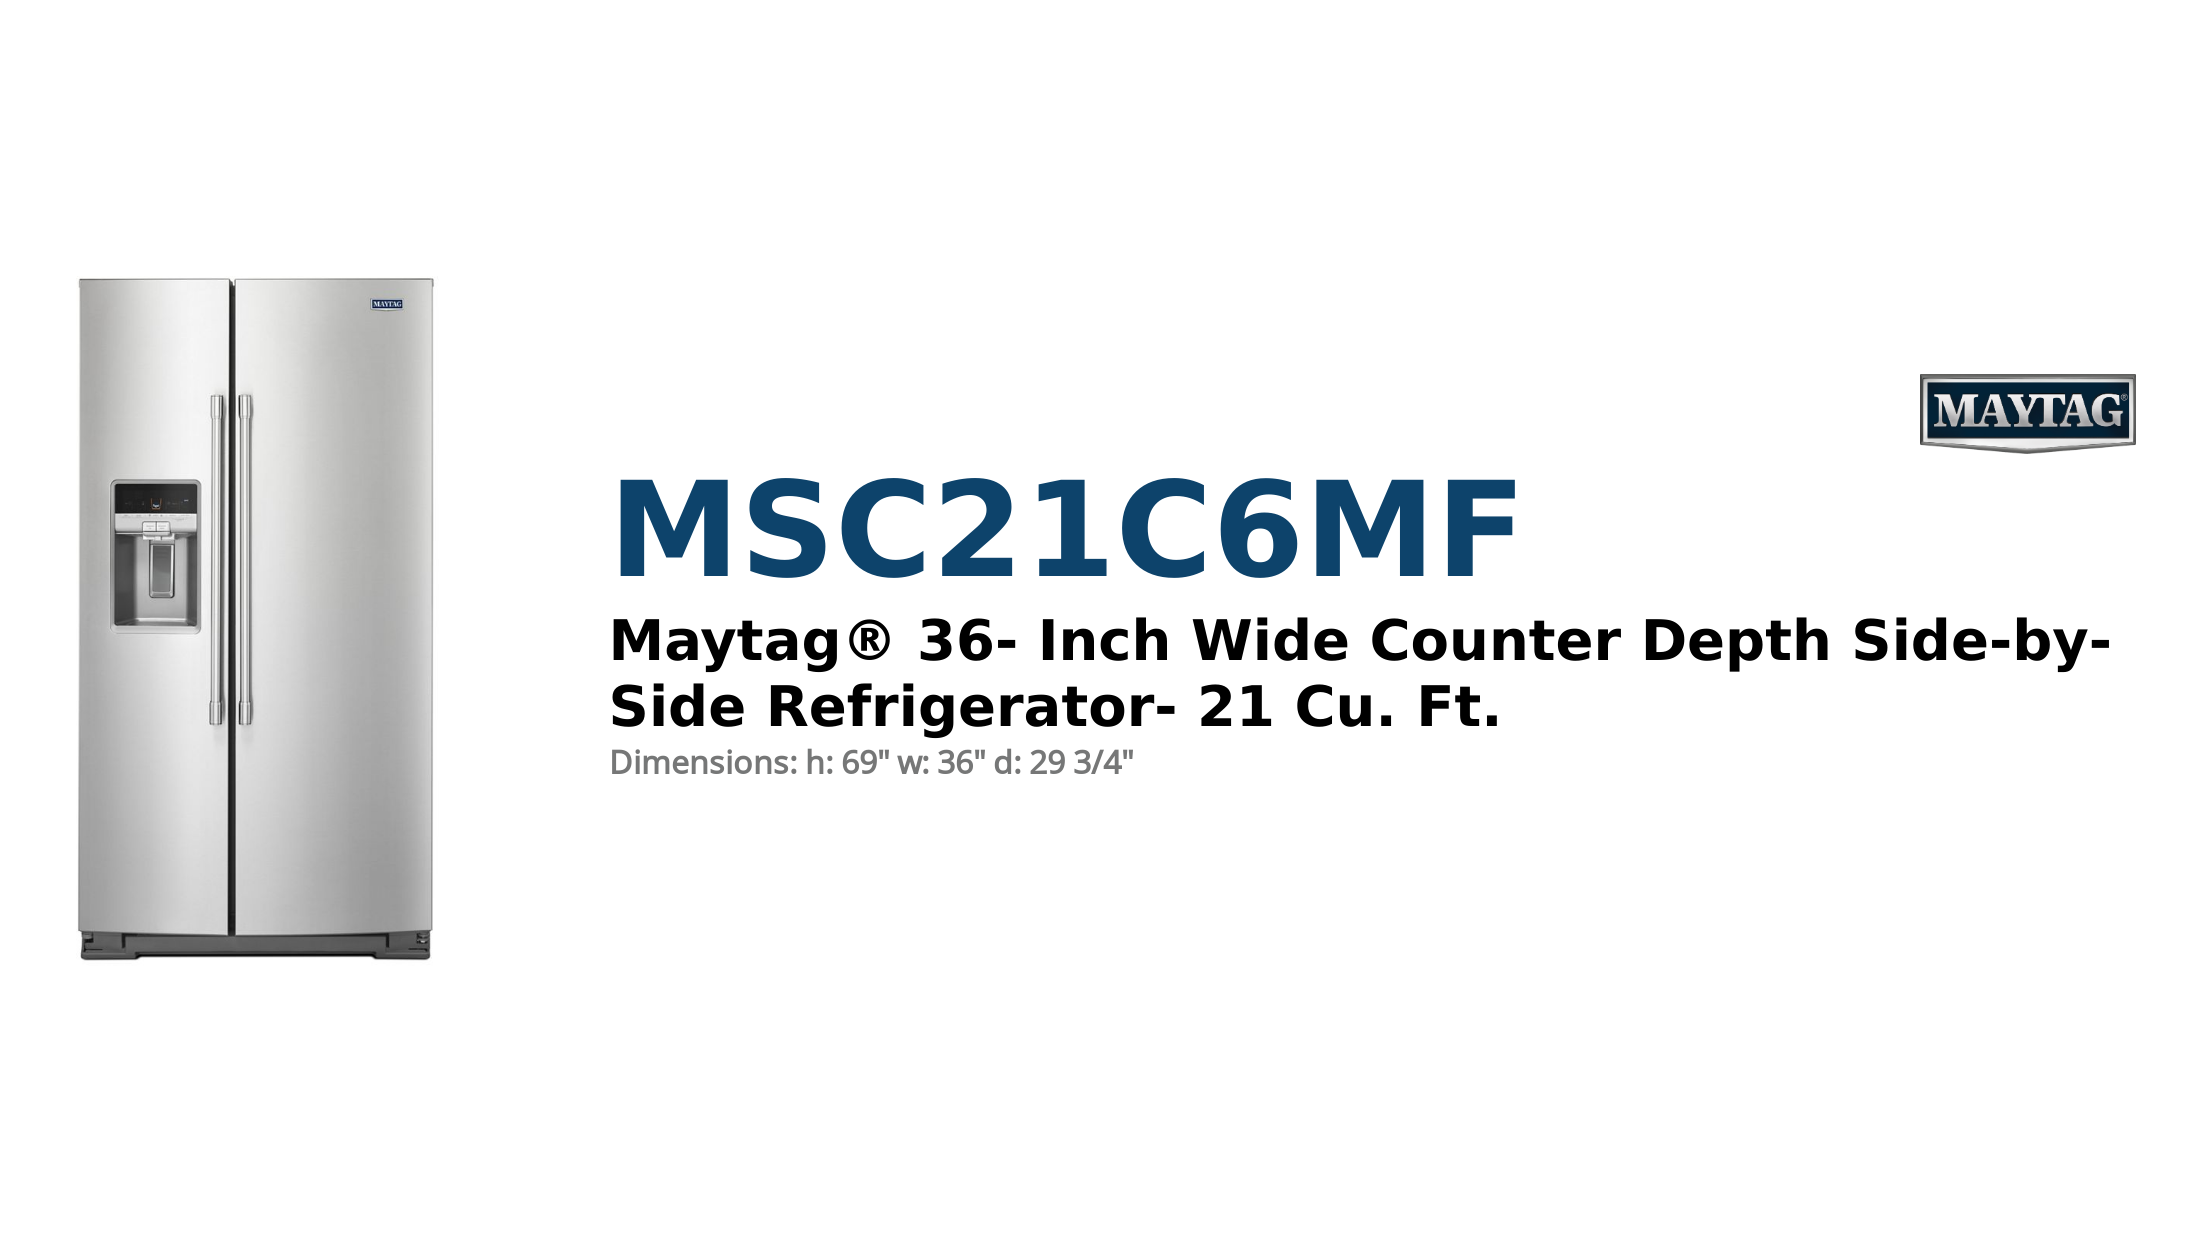 Maytag® 36- Inch Wide Counter Depth Side-by-Side Refrigerator- 21 Cu. Ft.
 